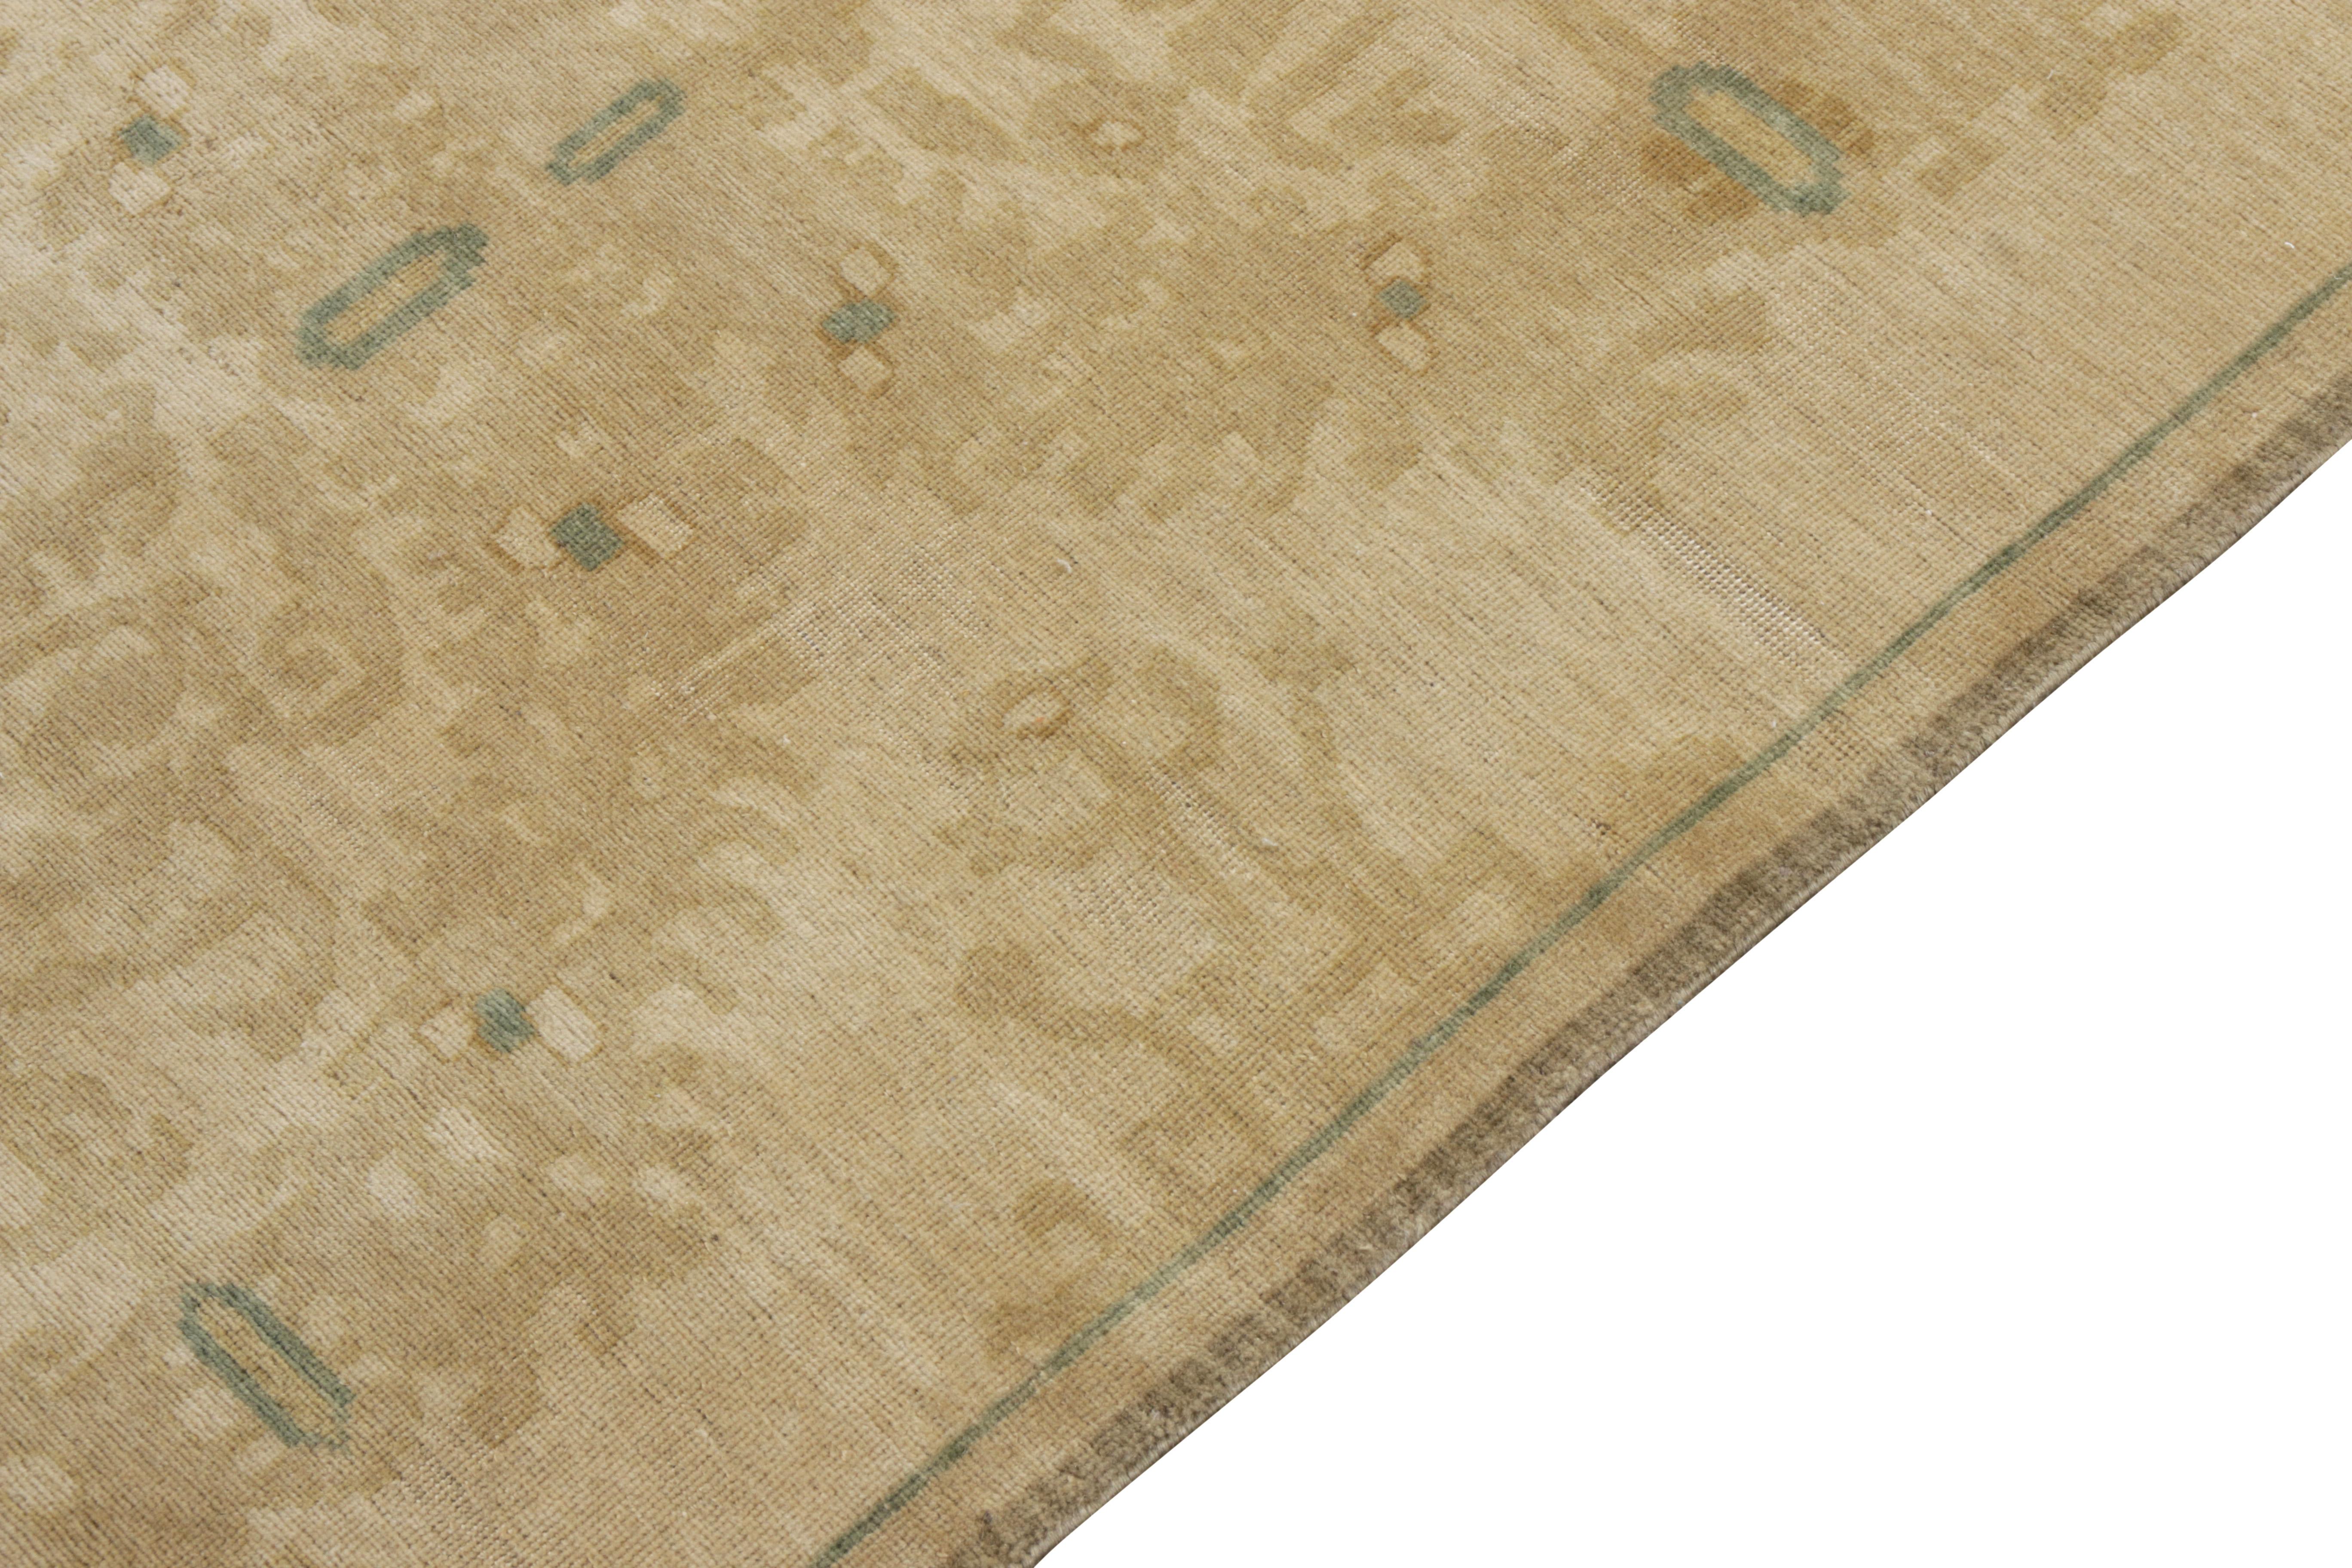 Indian Rug & Kilim’s European Style rug, all over Beige-Brown, Green Medallion Pattern For Sale